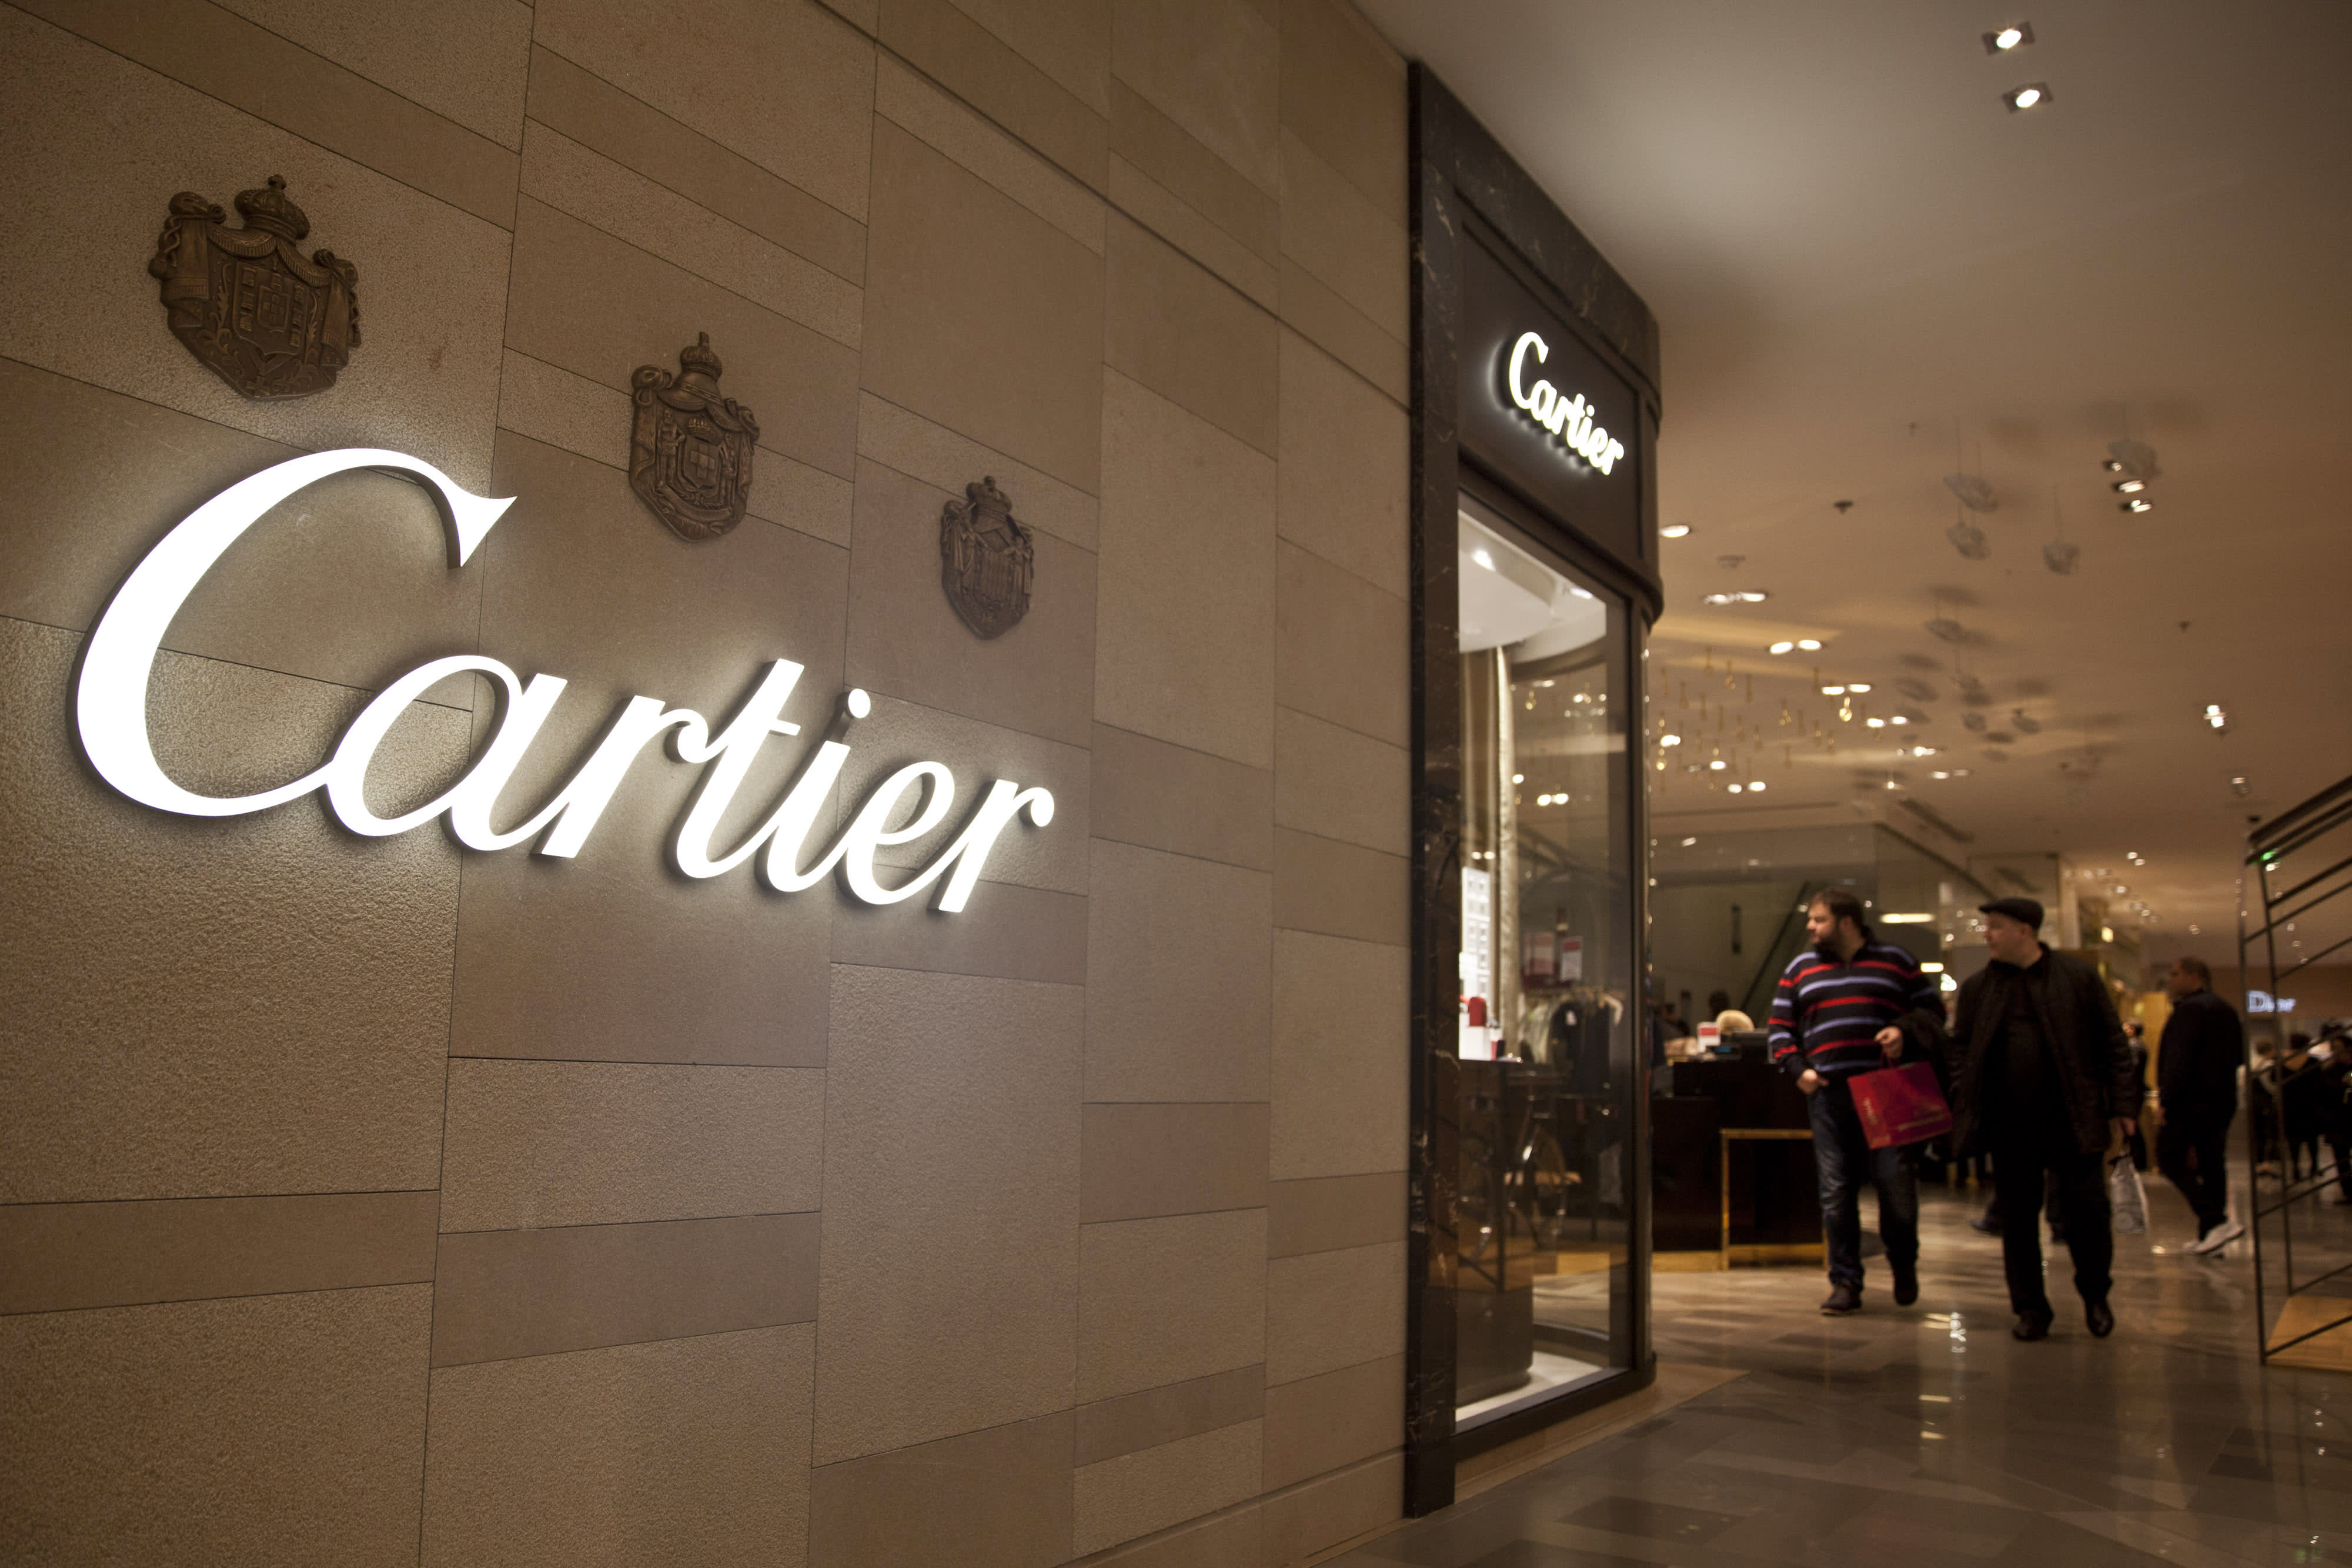 Has anyone noticed that Richemont group is running out of ideas